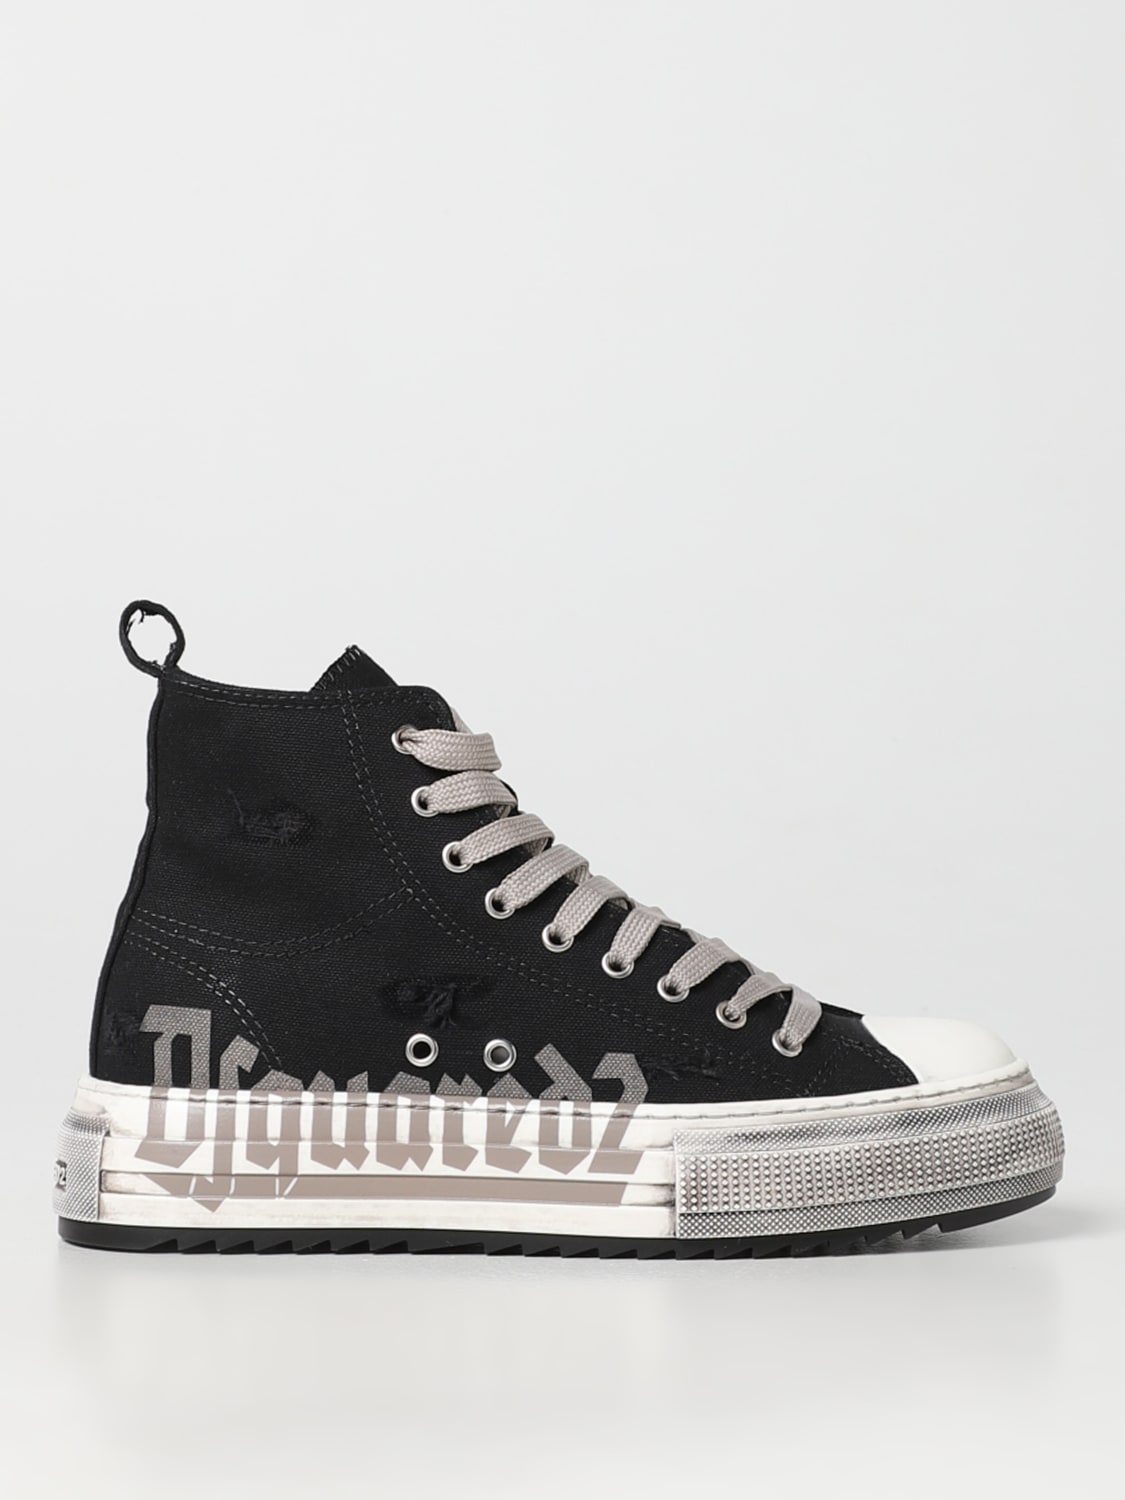 DSQUARED2: Berlin sneakers in fabric Black | Dsquared2 sneakers online at